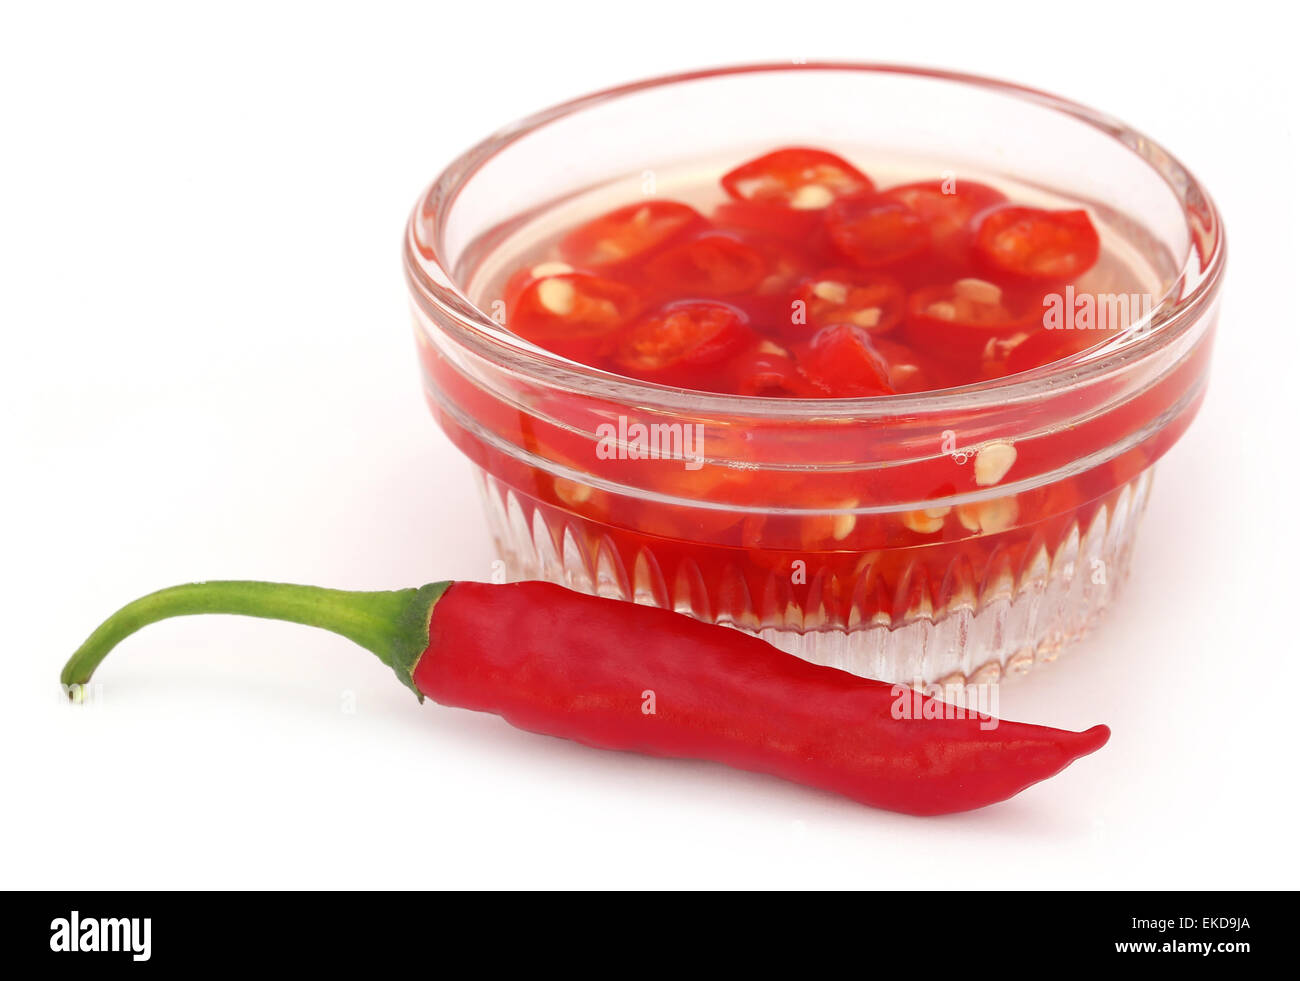 Red chili peppers in a transparent bowl over white background Stock Photo